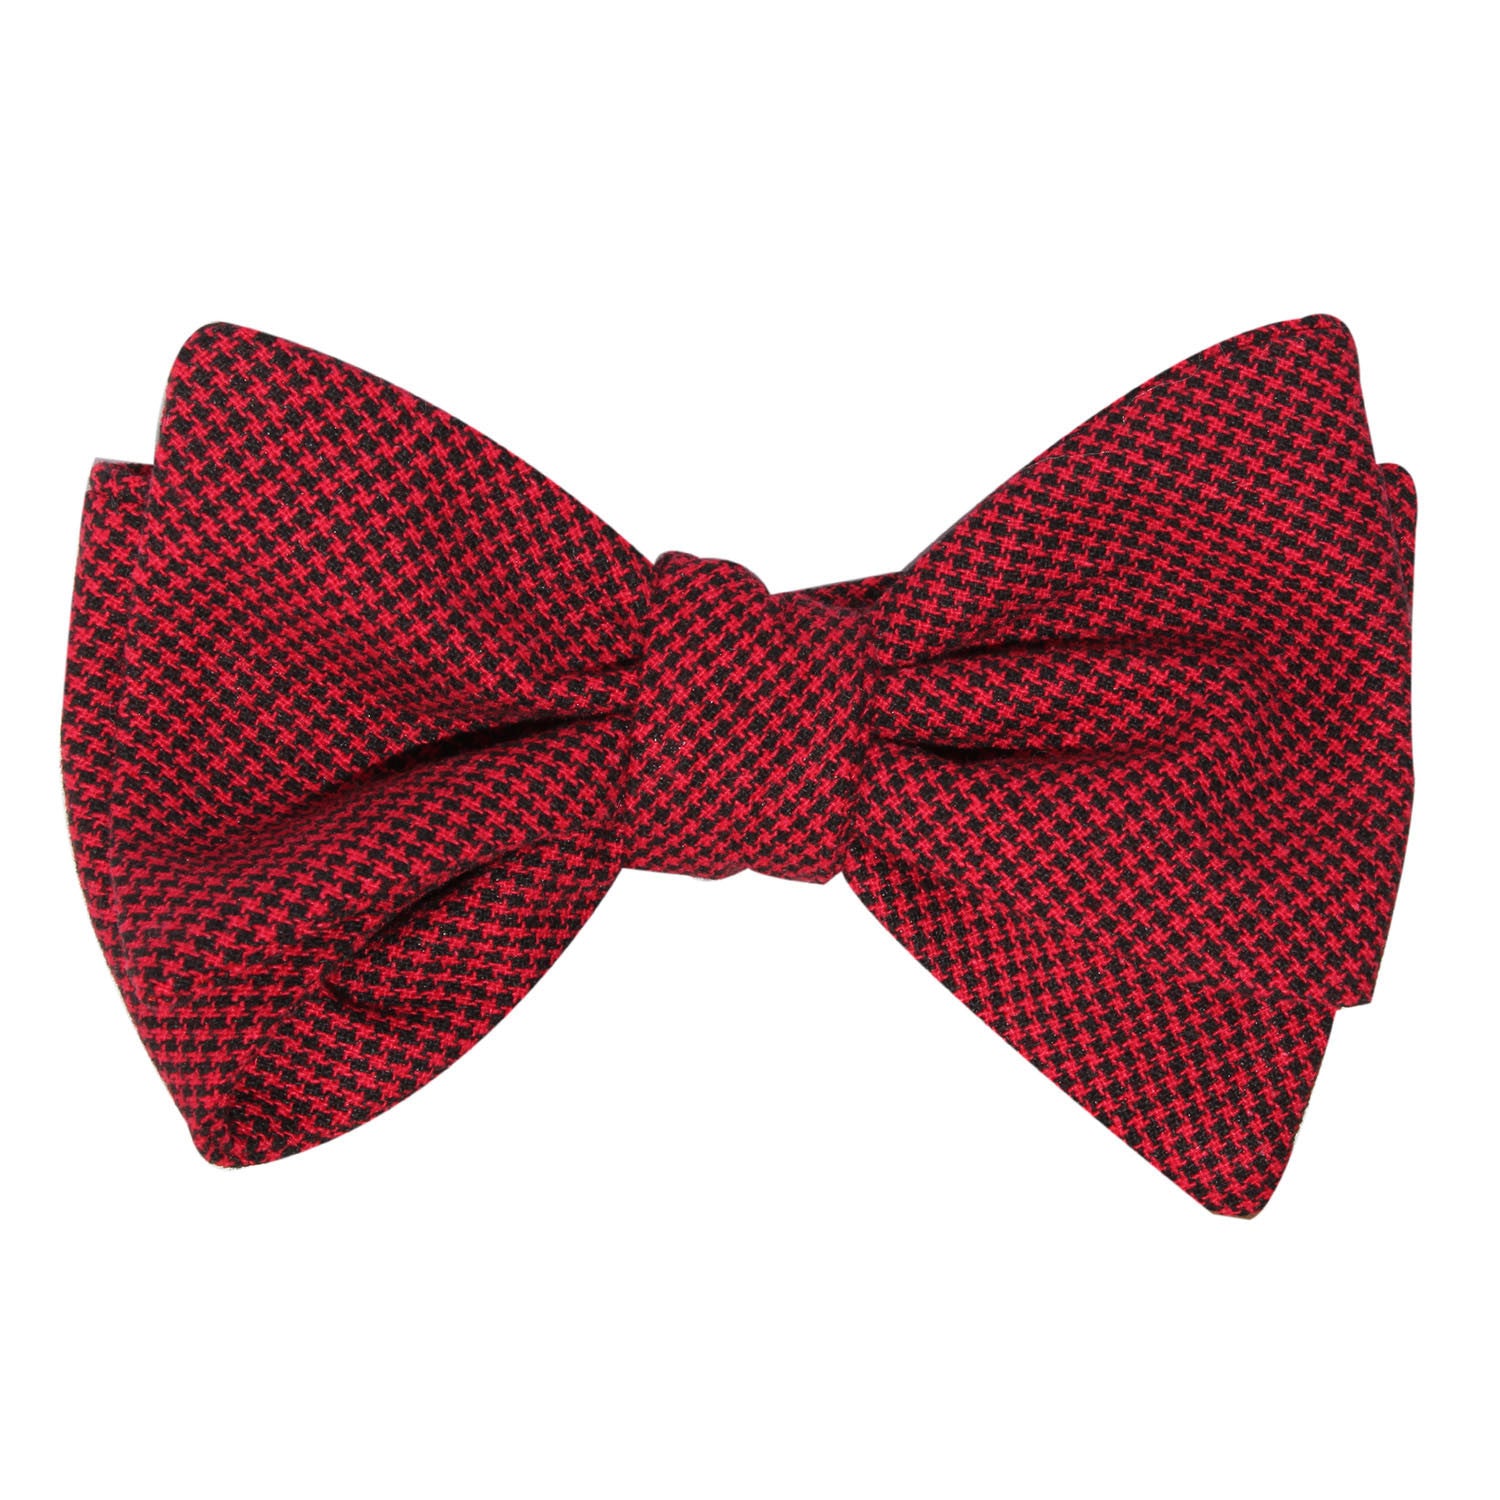 Red Black Houndstooth Cotton Self Tie Bow Tie 1